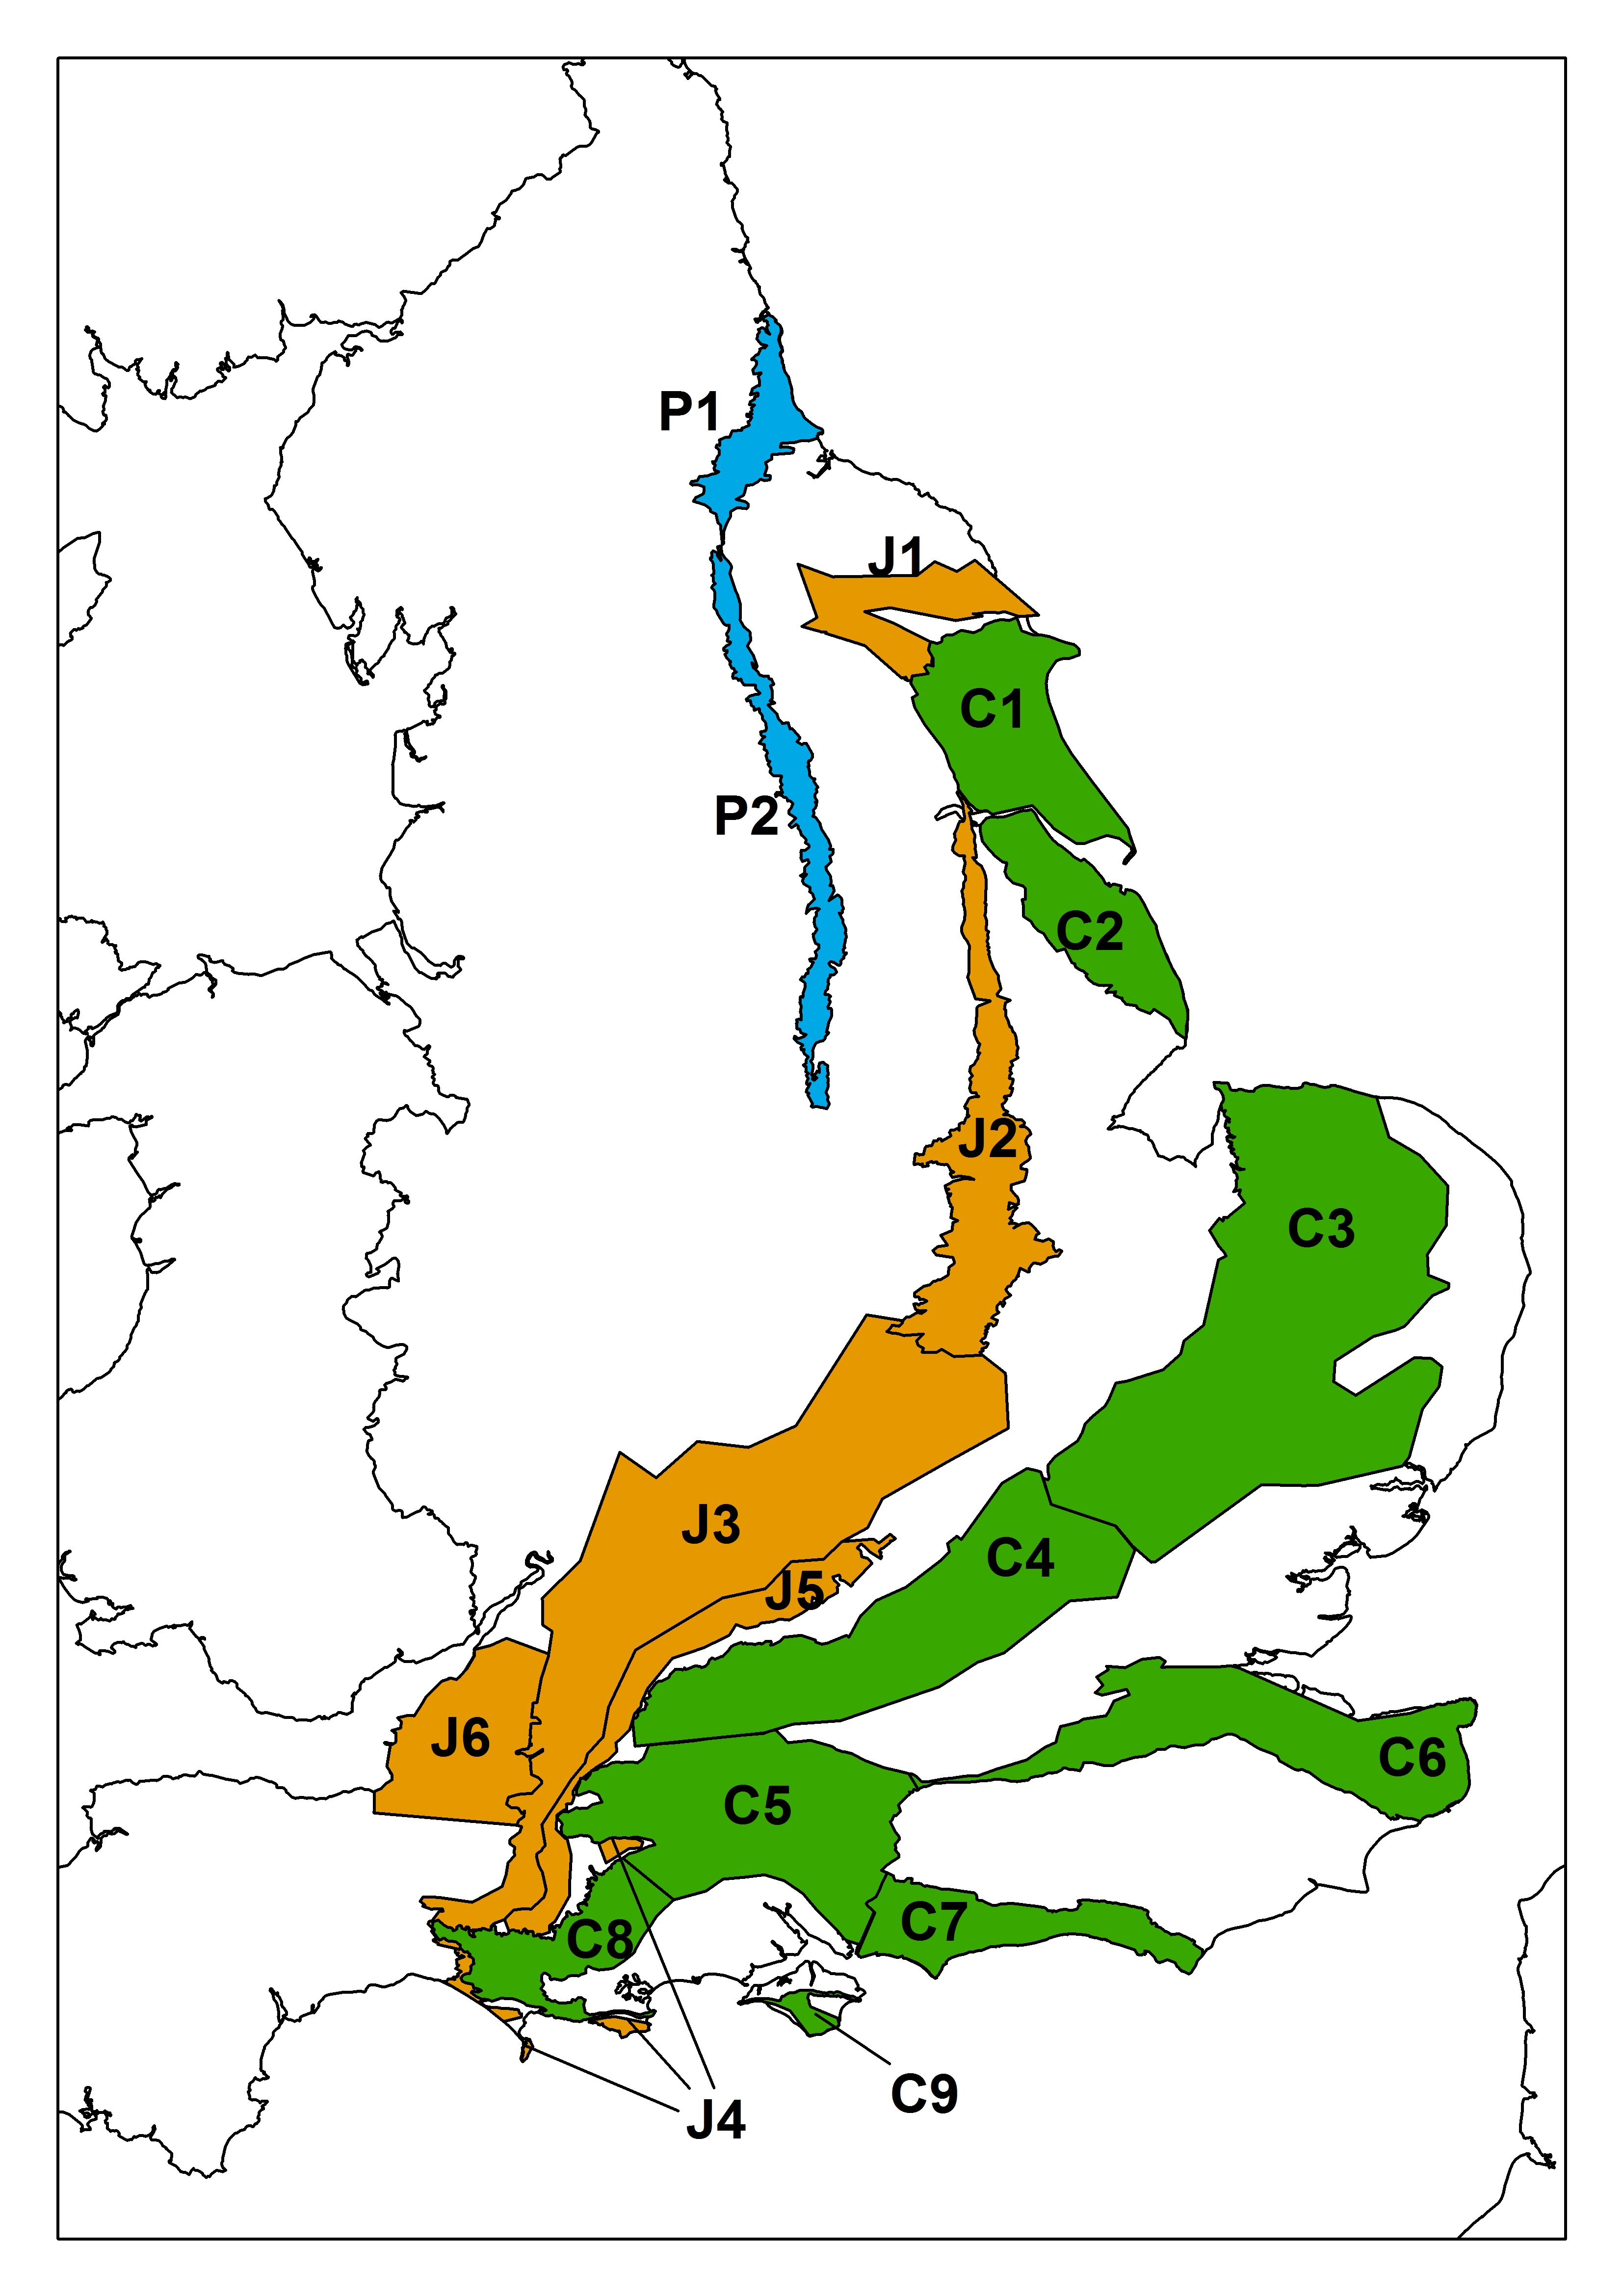 Map overview showing the karst report areas across England